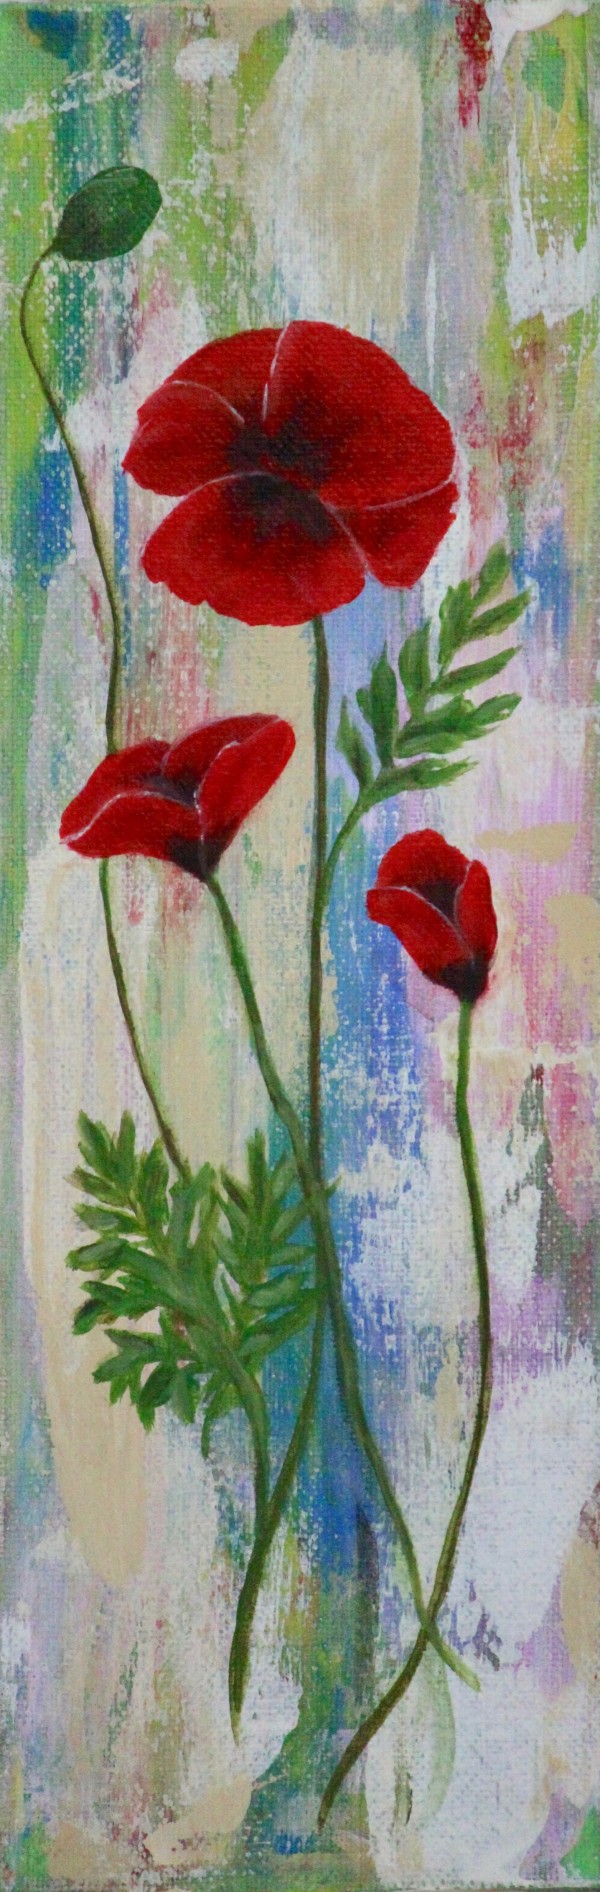 Poppies #3 by Lorelle Carr